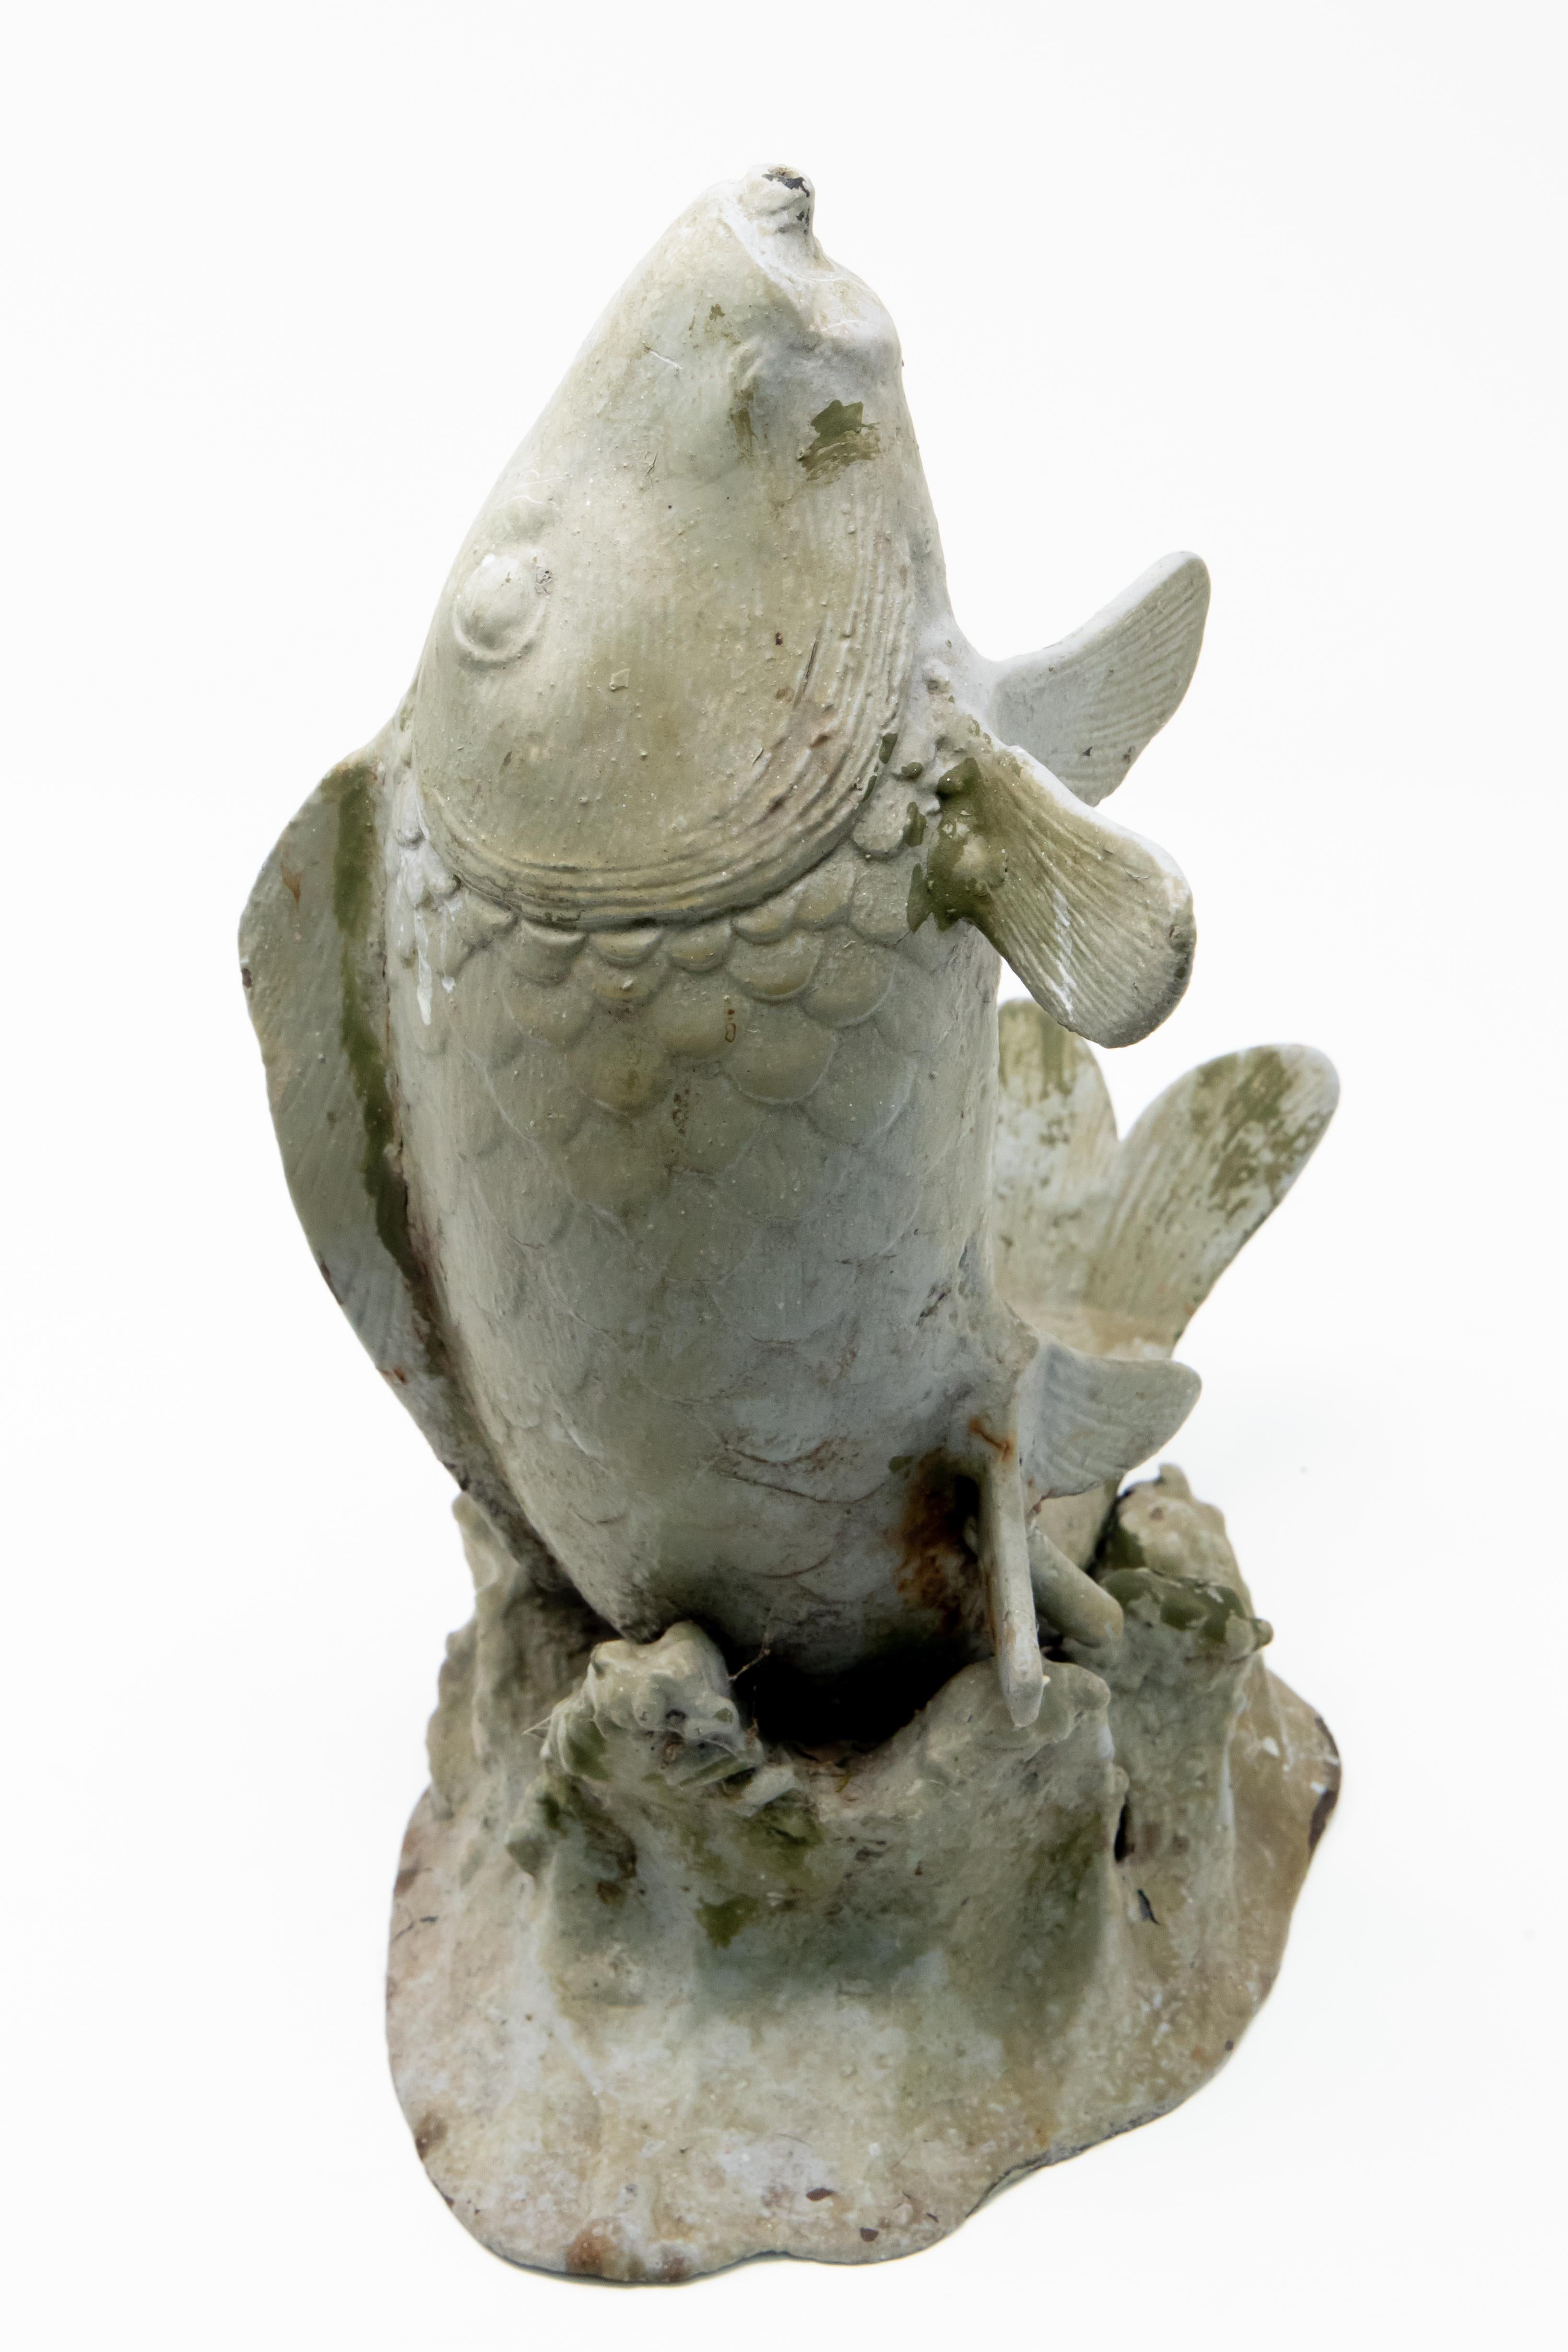 This cast metal fish fountain head will look great in any water element. Hand cast and aged beautifully. Has a spout up the center for water to shoot out of. He is posed to look like he is jumping out of water.